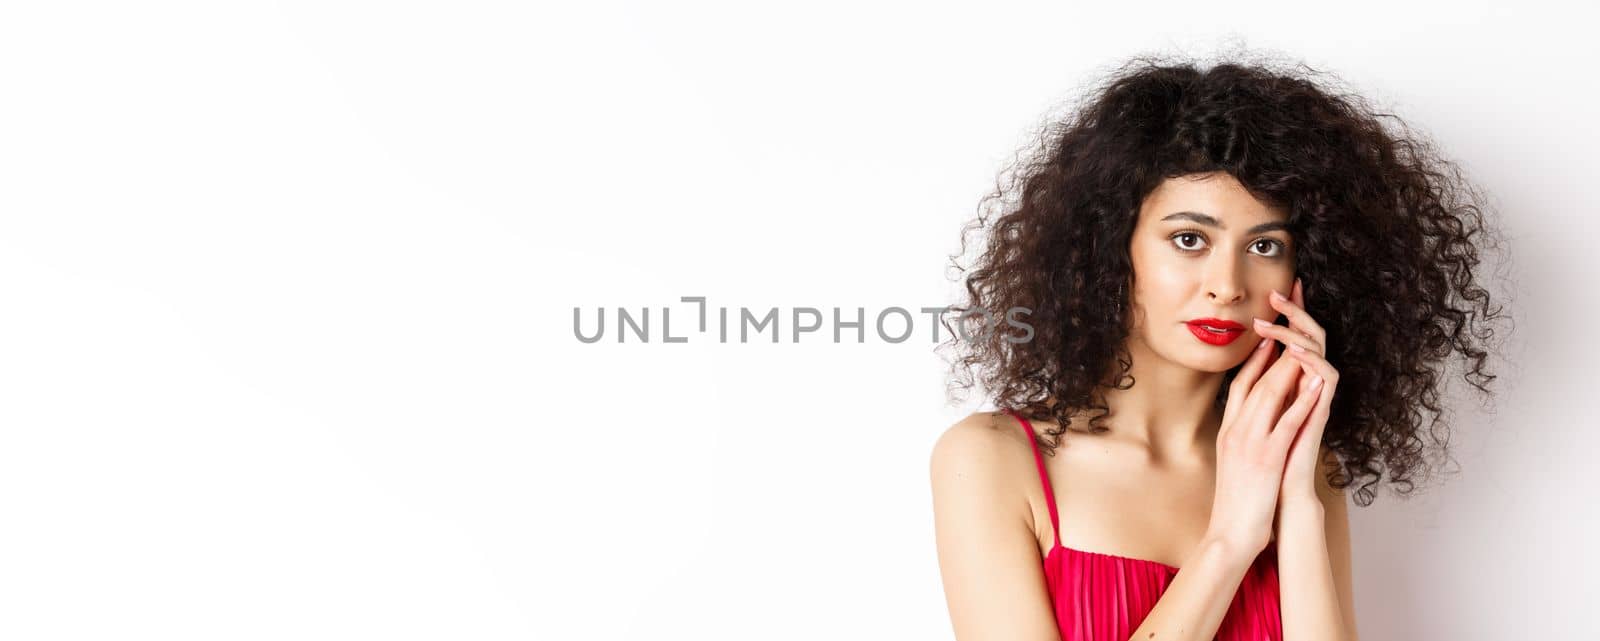 Close-up of tender romantic woman, gently touching face and looking sensual at camera, white background.